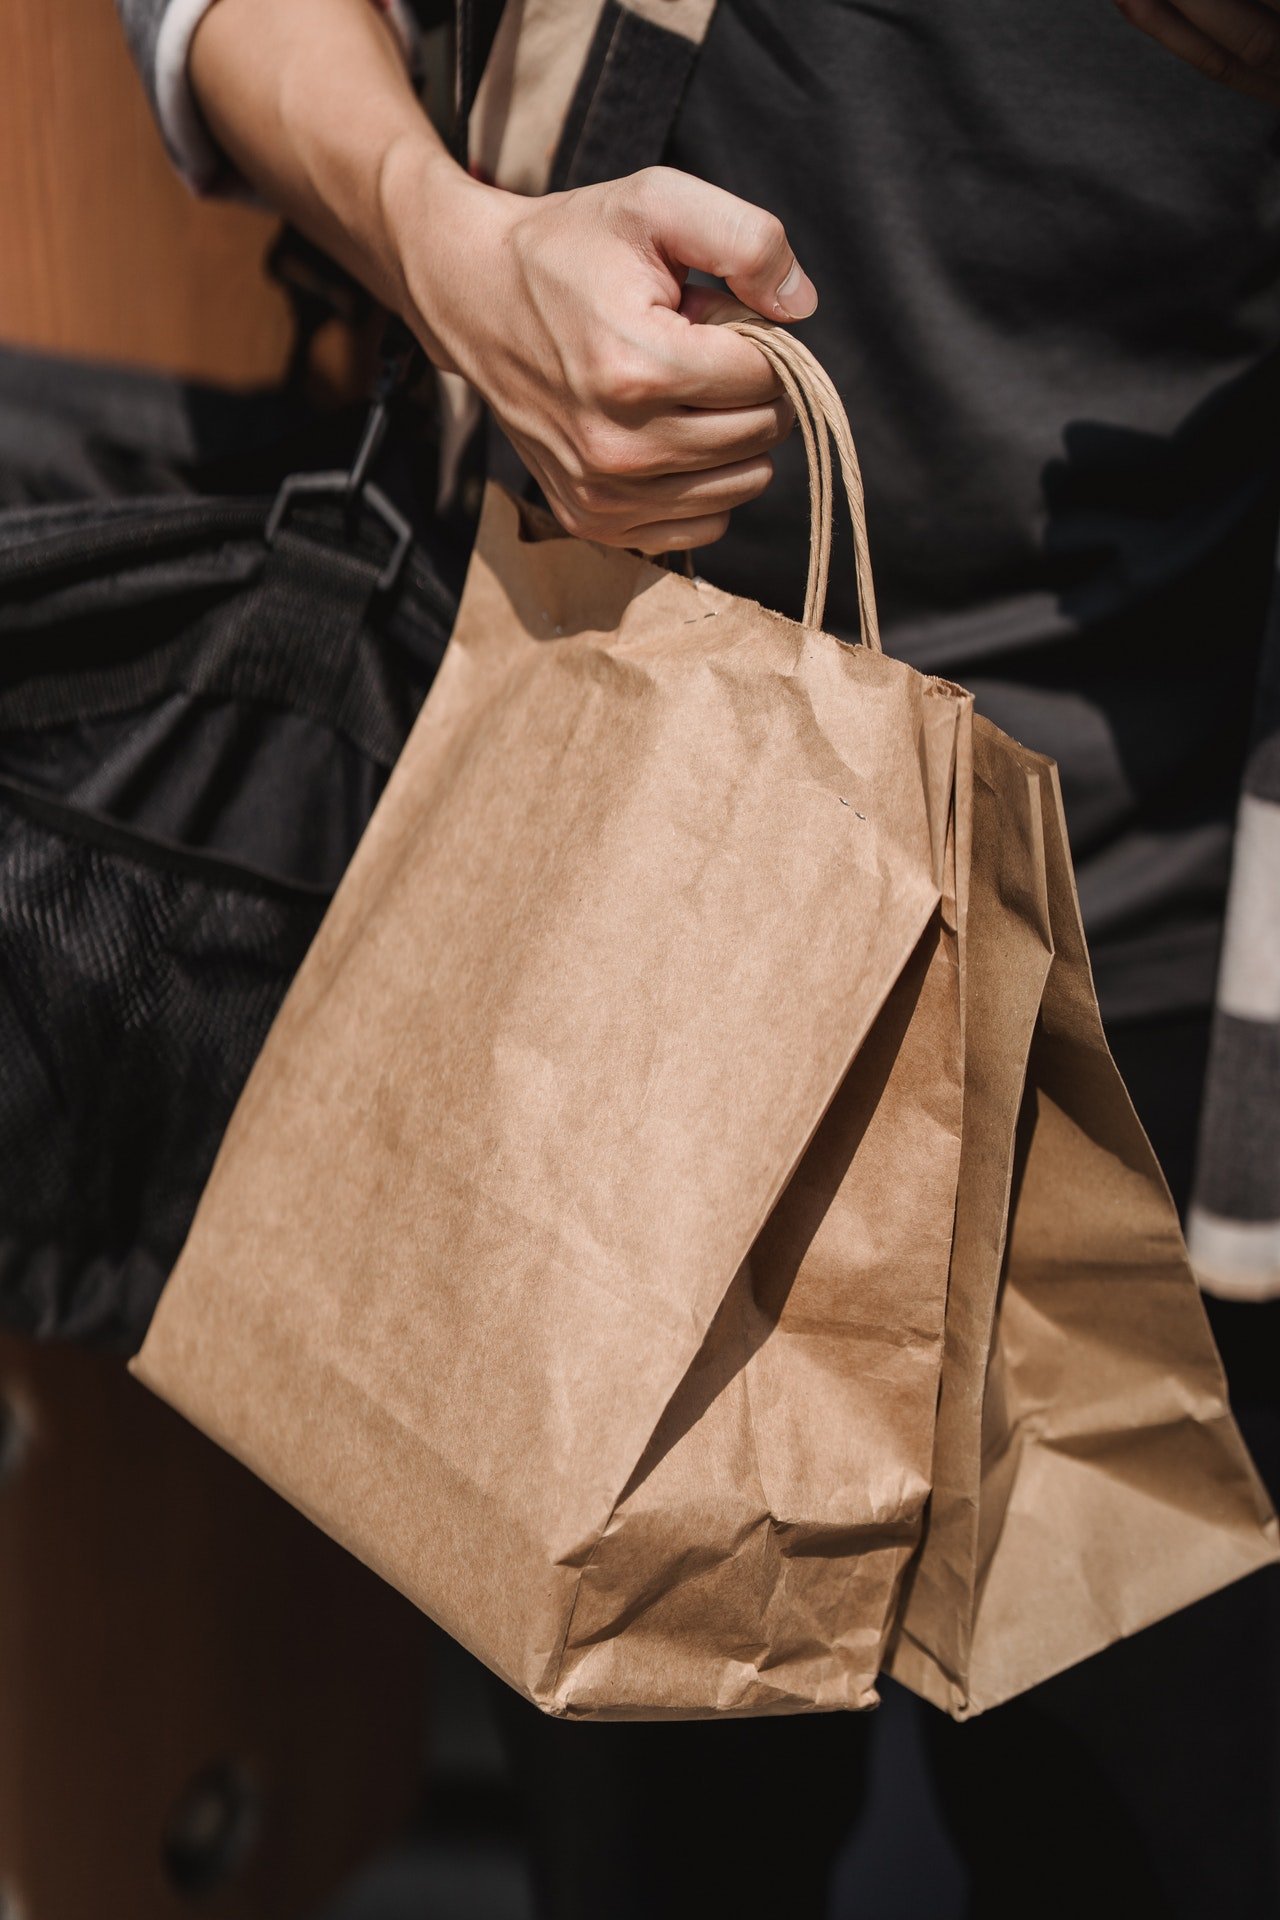 The old man tried to call out to John, who was already walking away with their bags | Source: Pexels